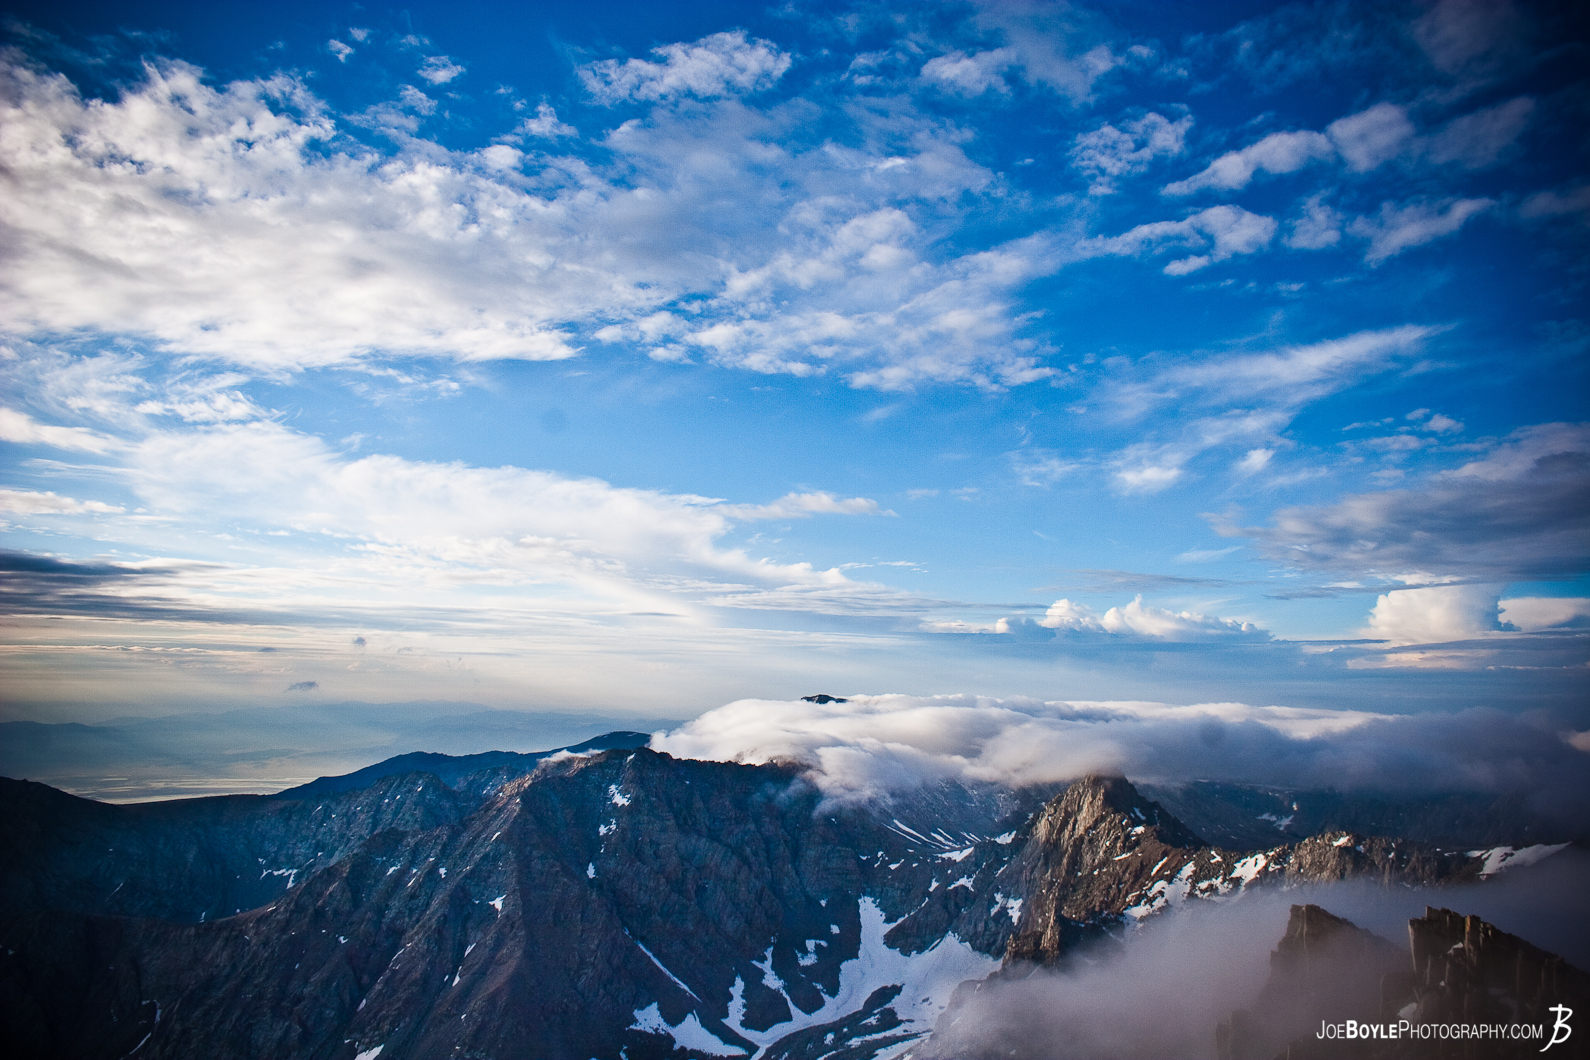  This photo is a view of the sky and tips of the surrounding mountain peaks, soon after we summited Mt. Whitney. 